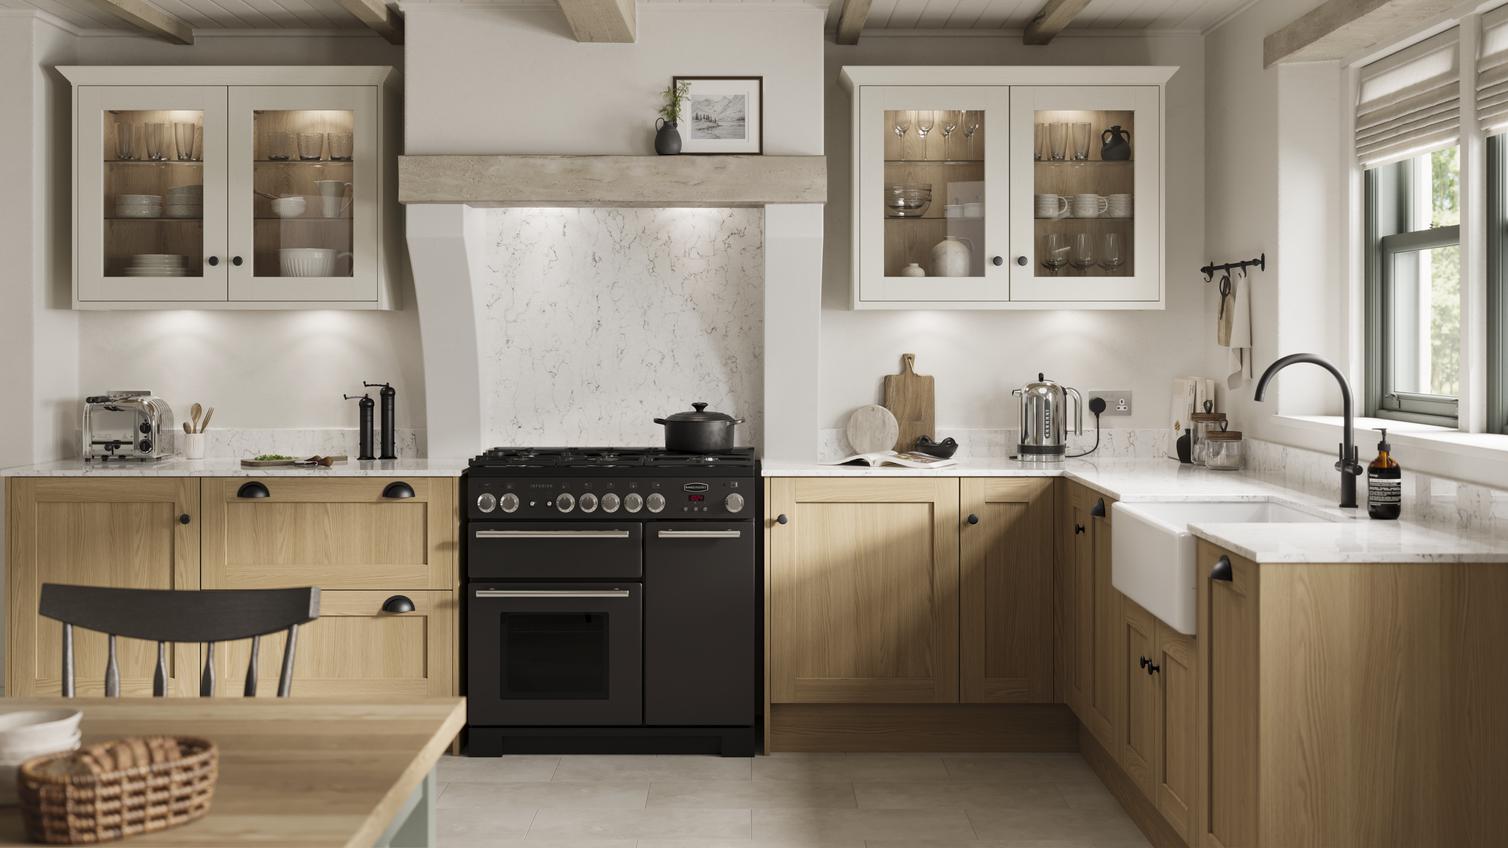 An L-shape kitchen with oak doors in a shaker style. Has white worktops and grey, tile-effect floors, and a black cooker.